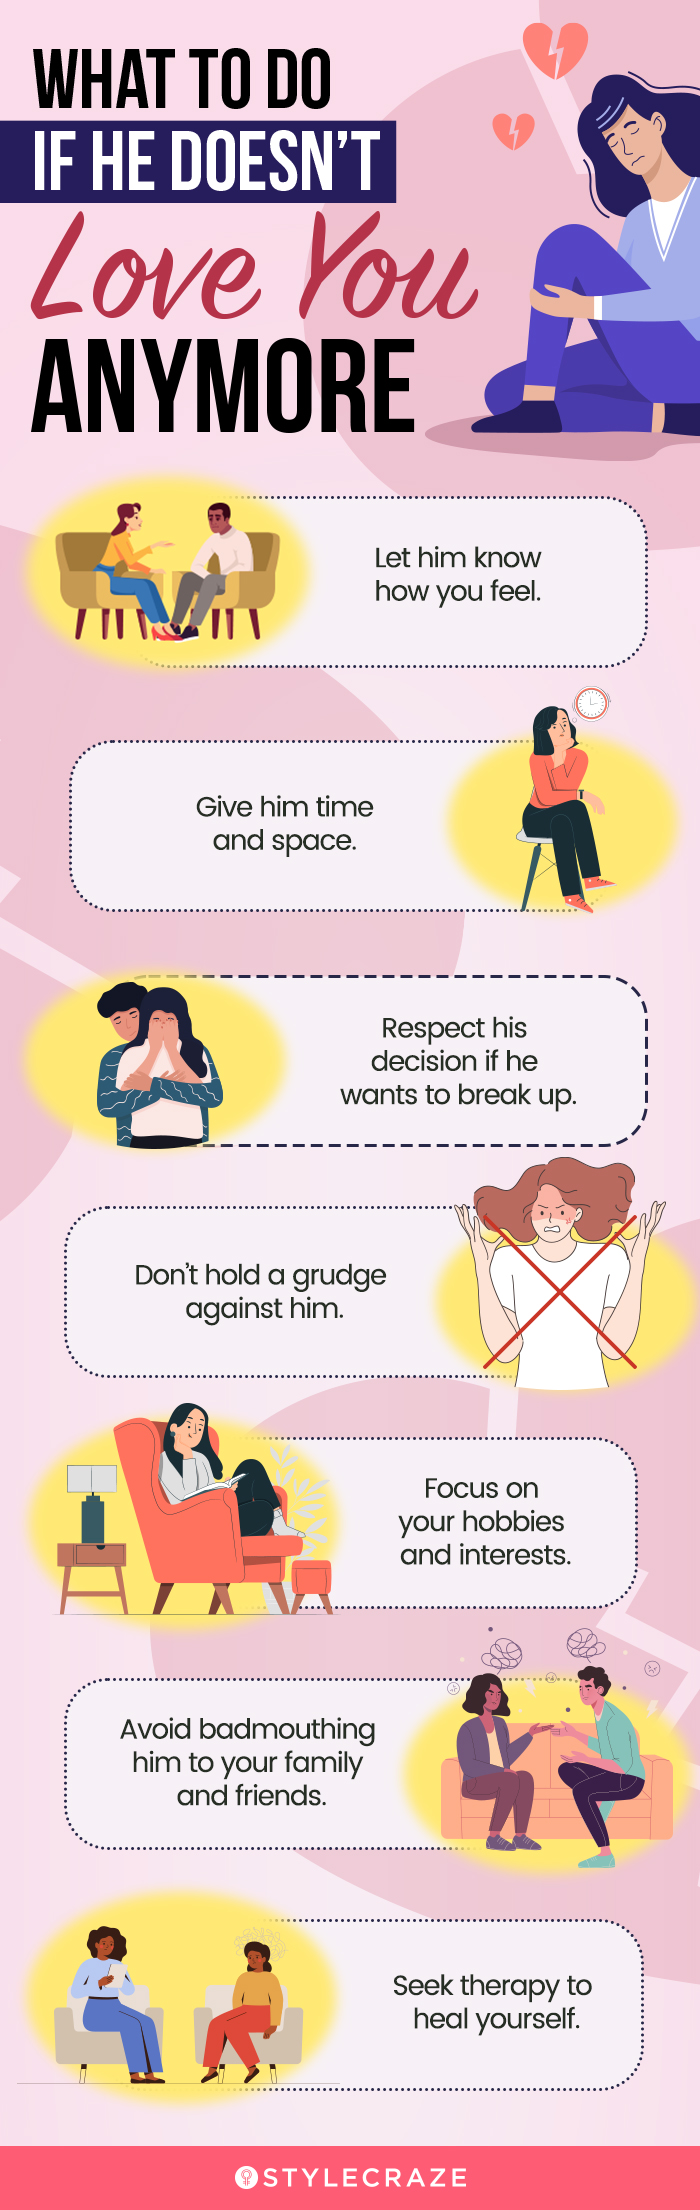 what to do if he doesn’t love you anymore (infographic)